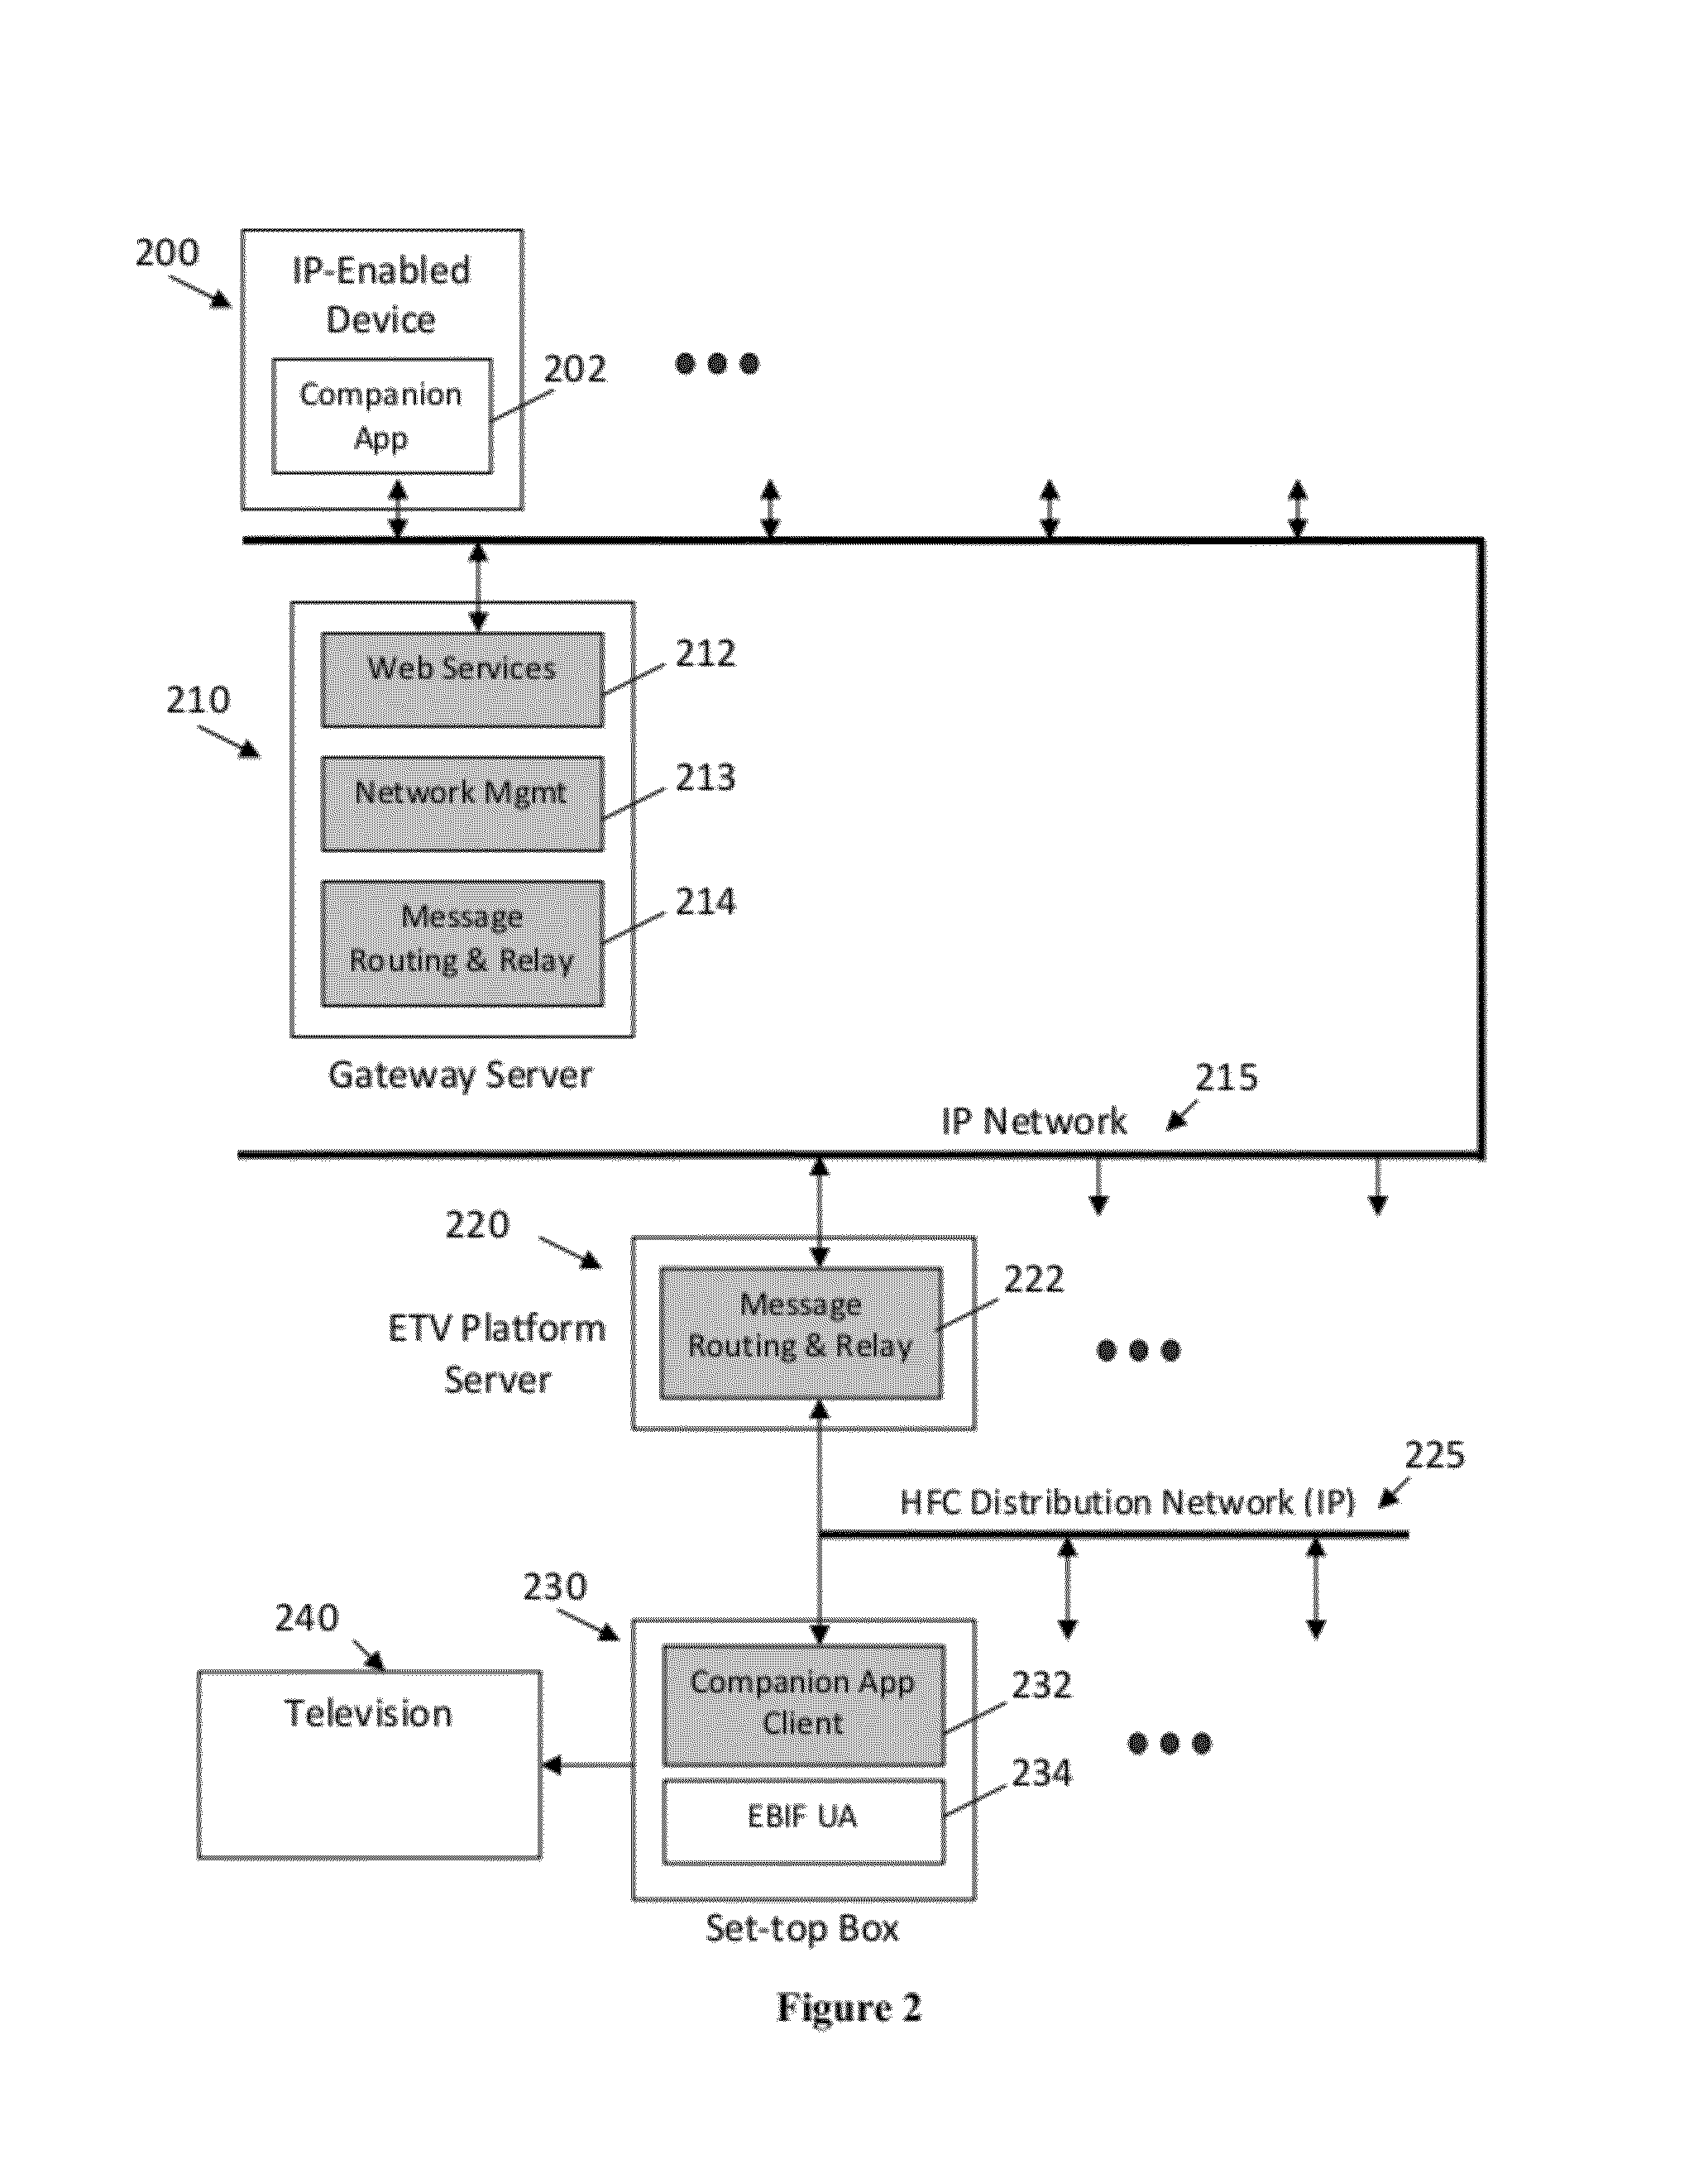 Systems and methods for providing companion services to customer equipment using an ip-based infrastructure